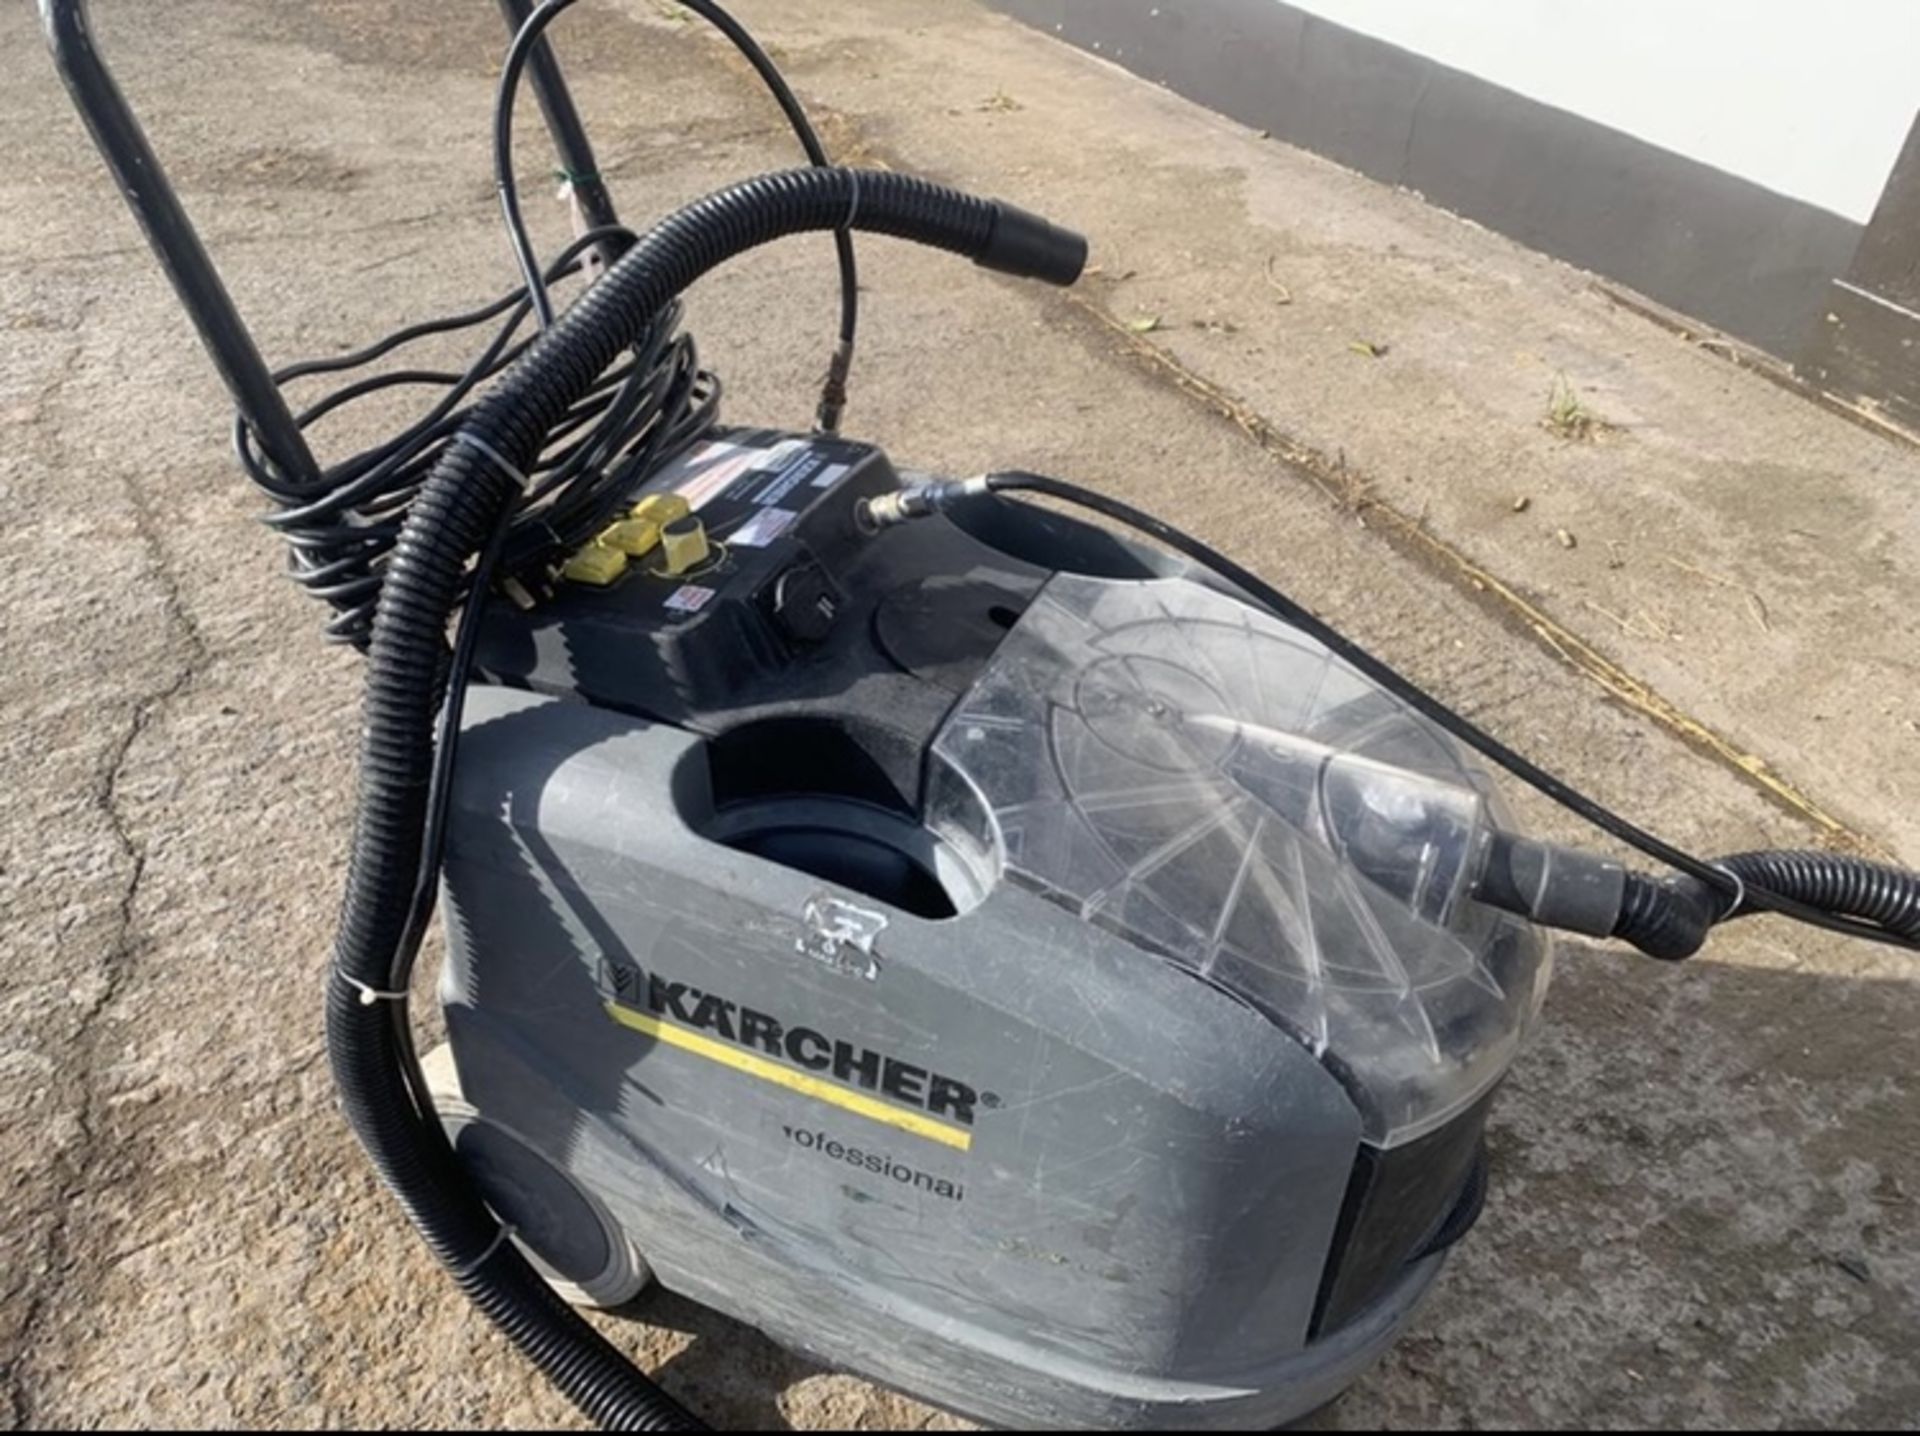 KARCHER WET AND DRY COMMERCIAL PUZZI 240V LOCATION N IRELAND - Image 2 of 4